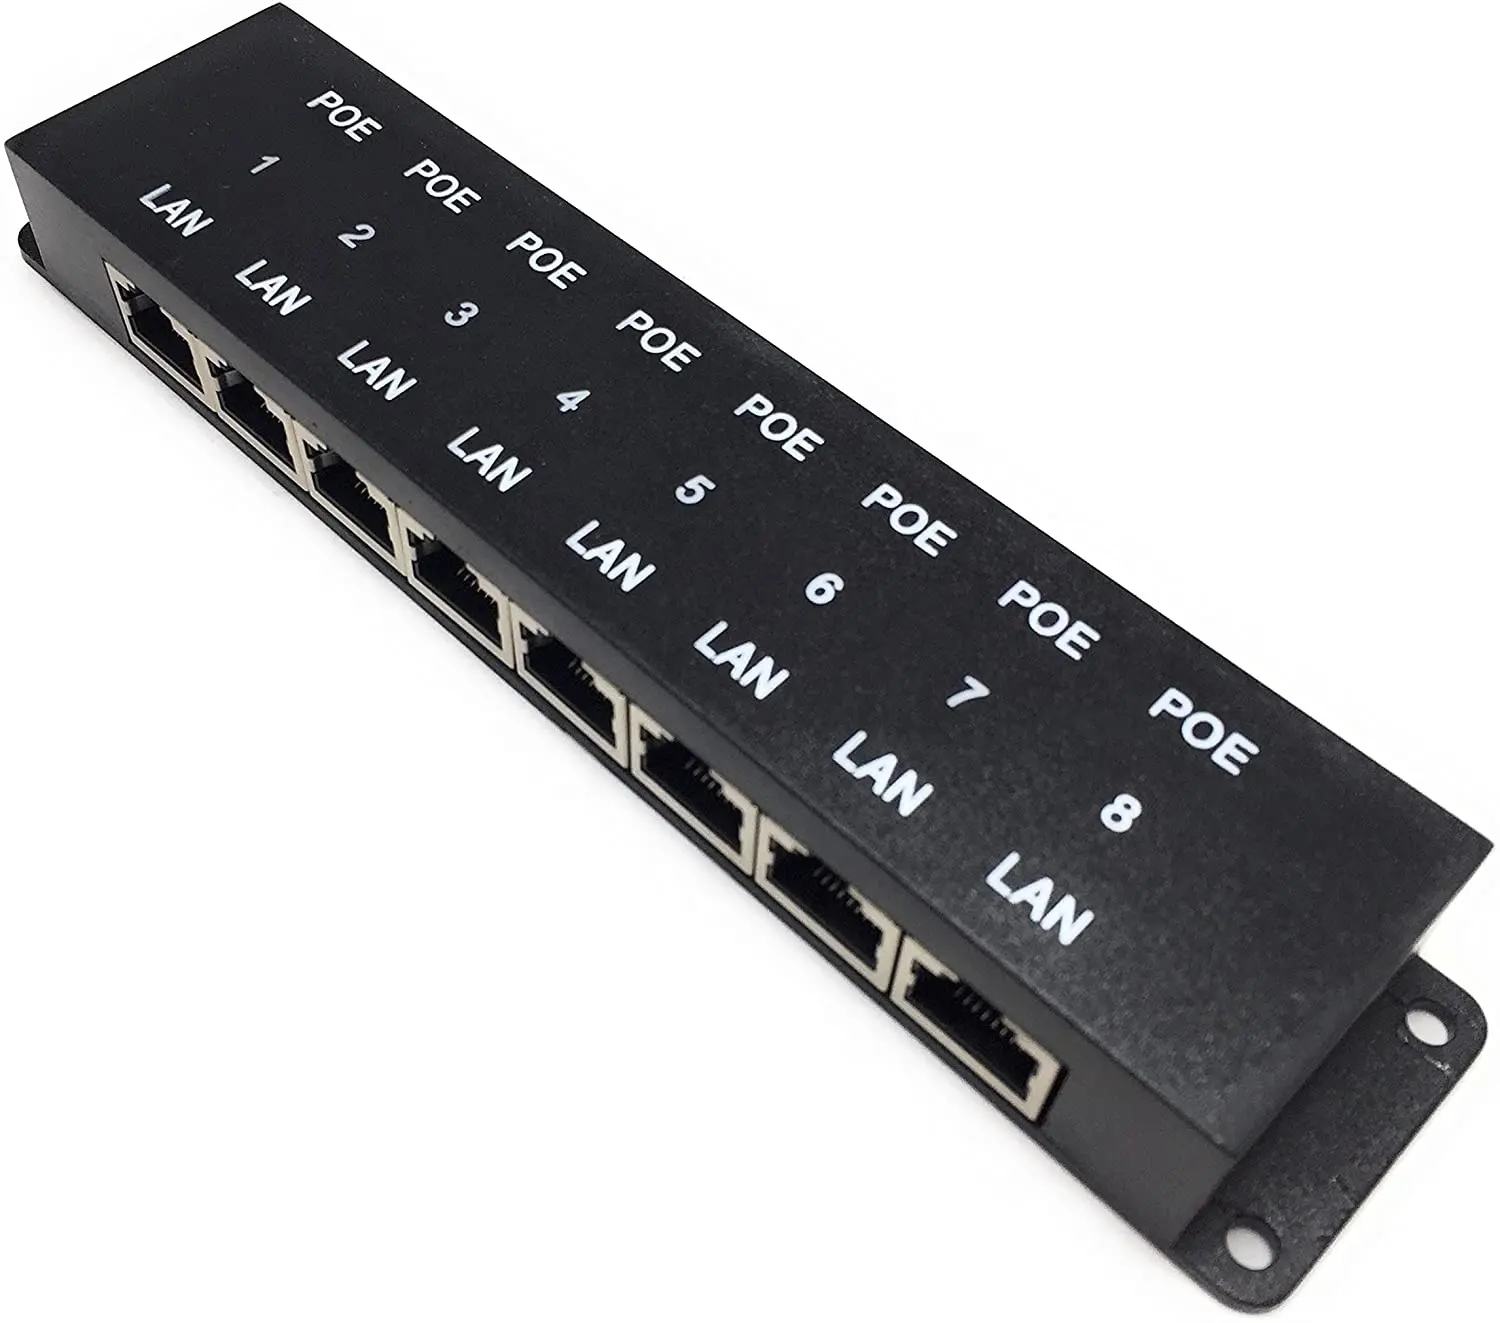 8 Port PoE Injector for Power and Data to 8 Devices Instantly Add Power Over Ethernet to Any Switch